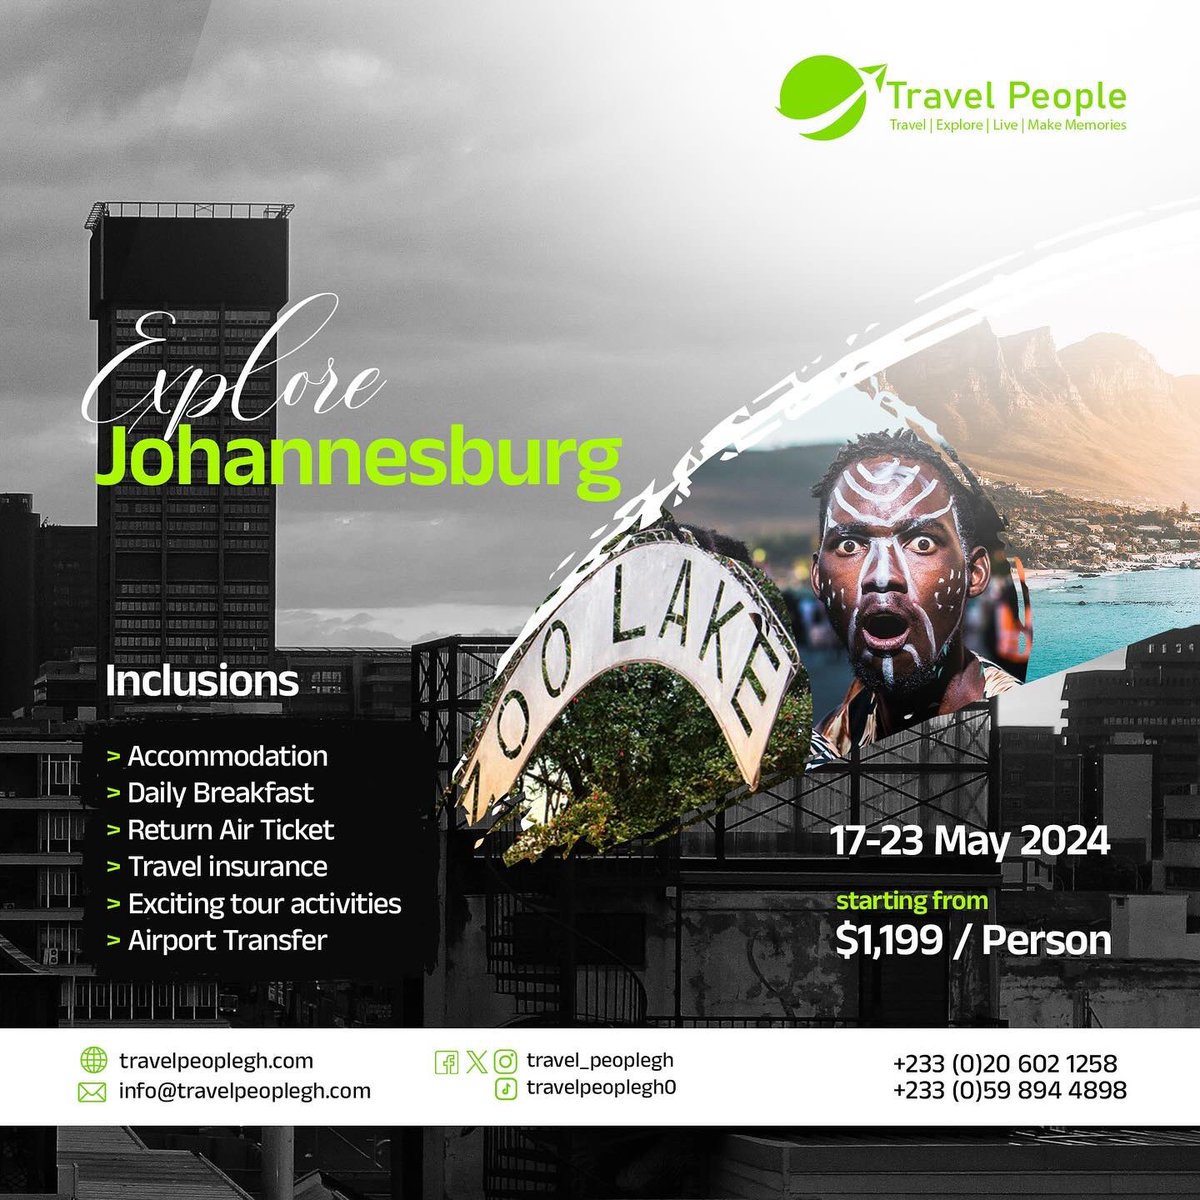 Next month is going to be ✨lit🥳
Joburg is calling all to an exciting and unforgettable trip coming up next month.

Why the wait, BOOK NOW!!!🎊

#trips #funtrip #exciting #tourist #fun #x #travelpeople #hotel #excitingplaces